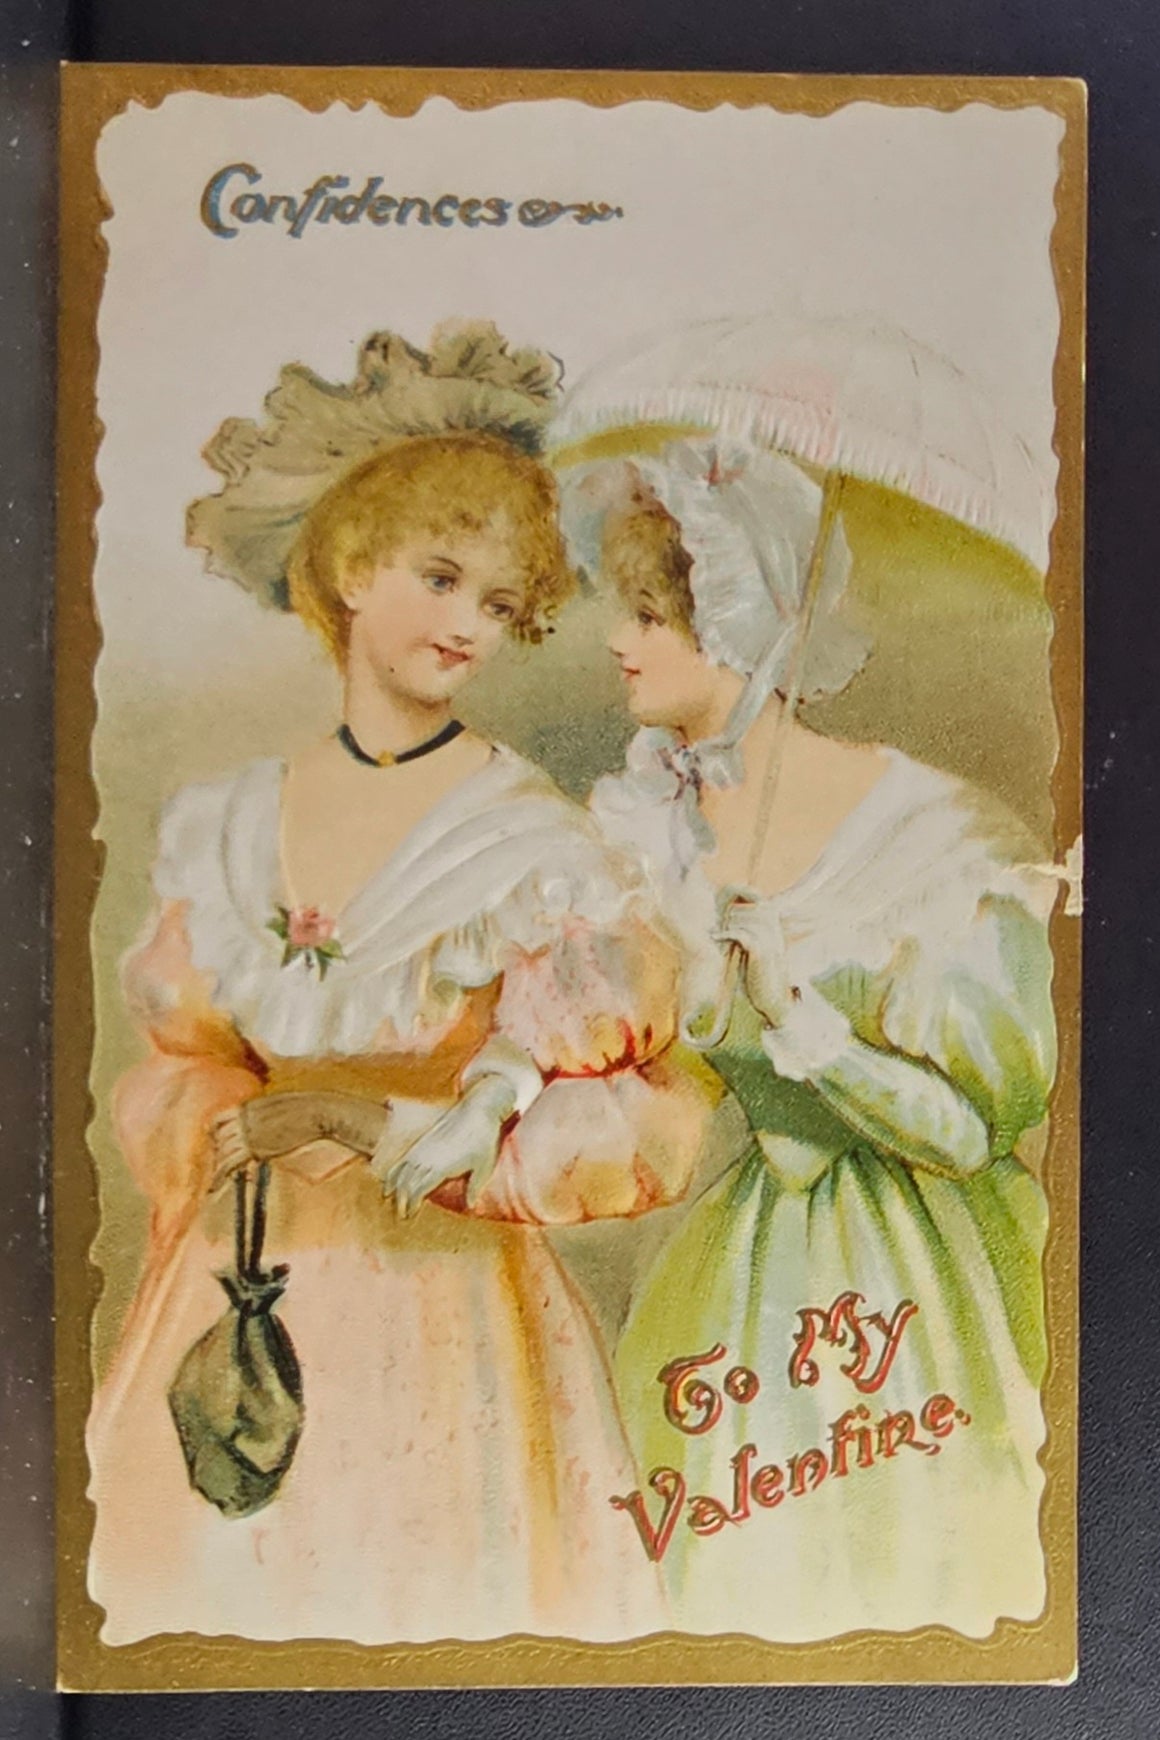 Valentine Postcard Titled Confidences No 2017 Two Women in Edwardian Dress Sharing a Word